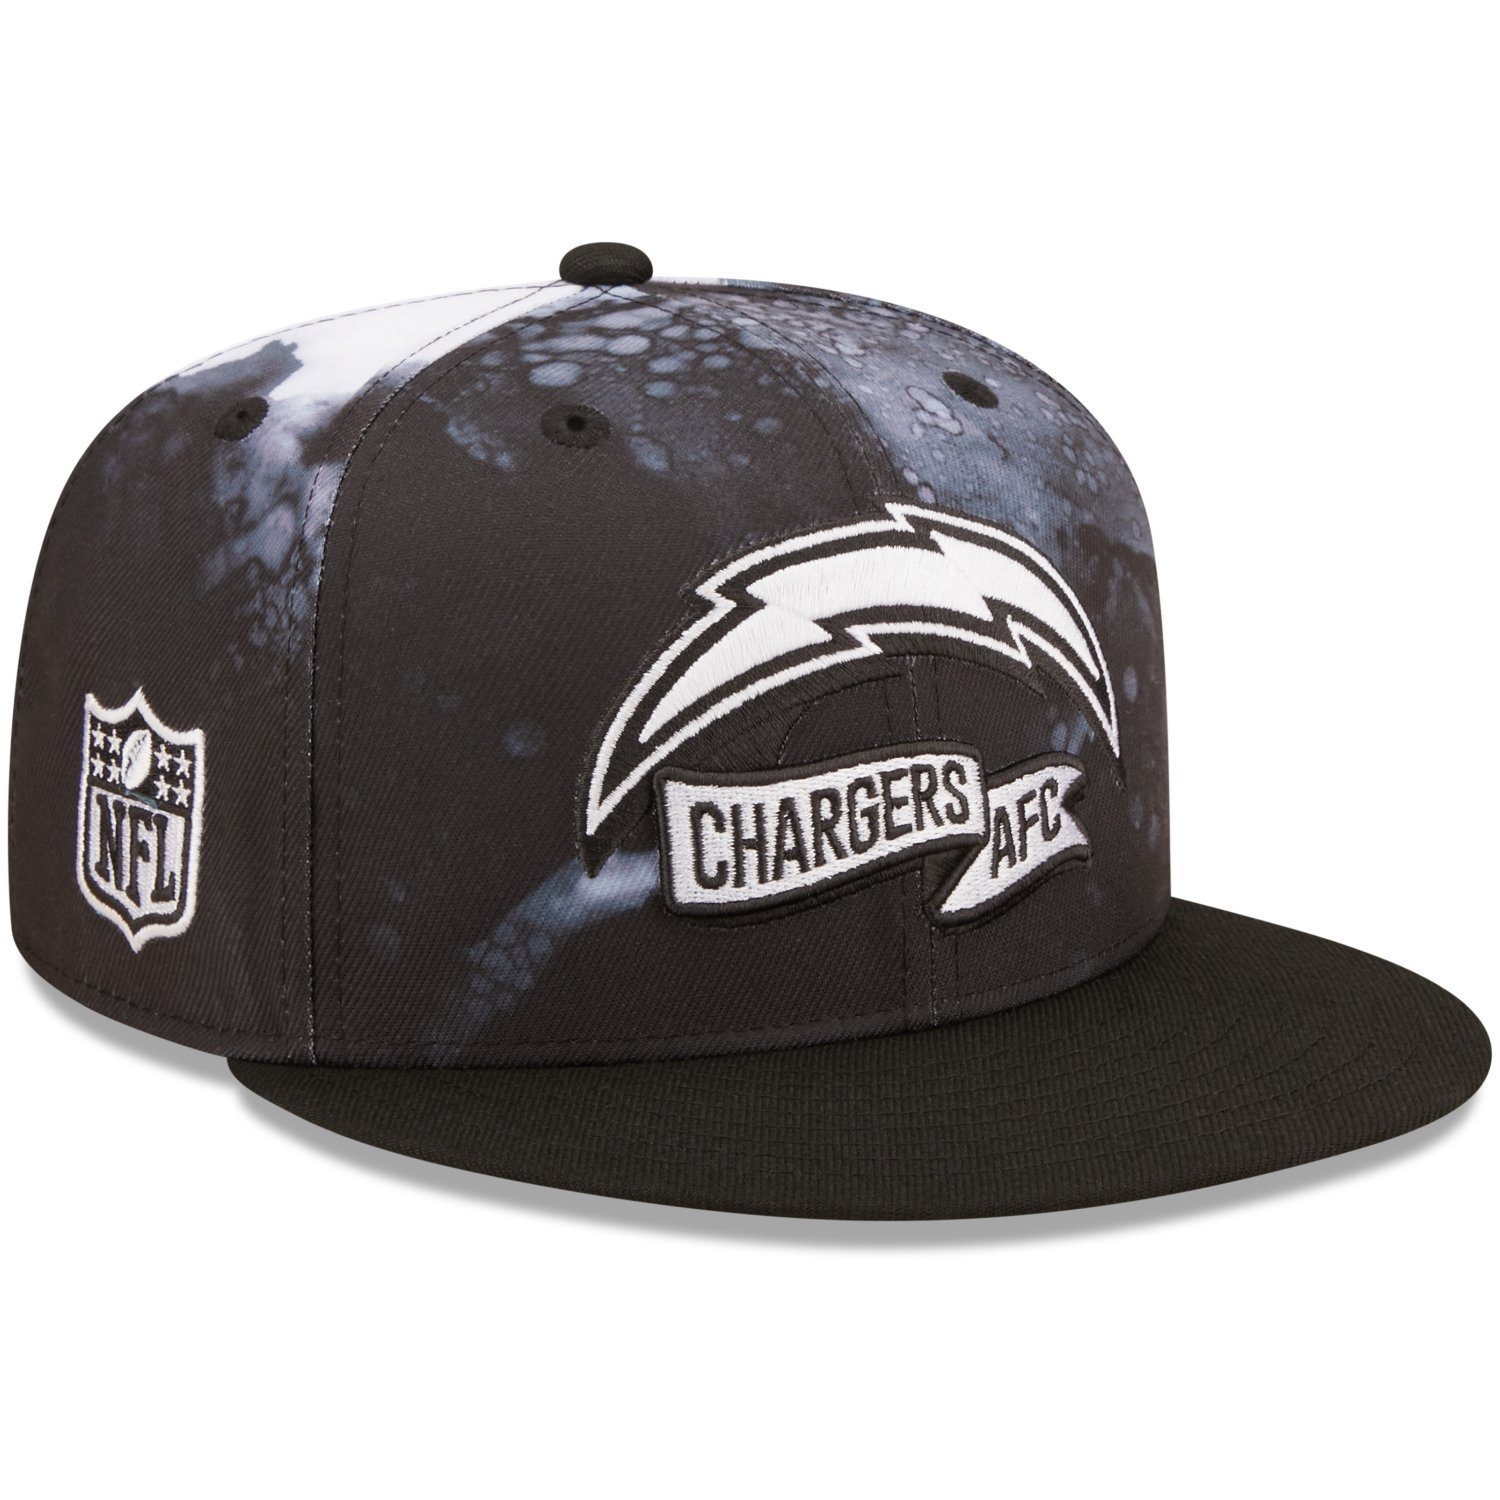 9Fifty Angeles Era New Los Sideline Snapback Chargers Cap